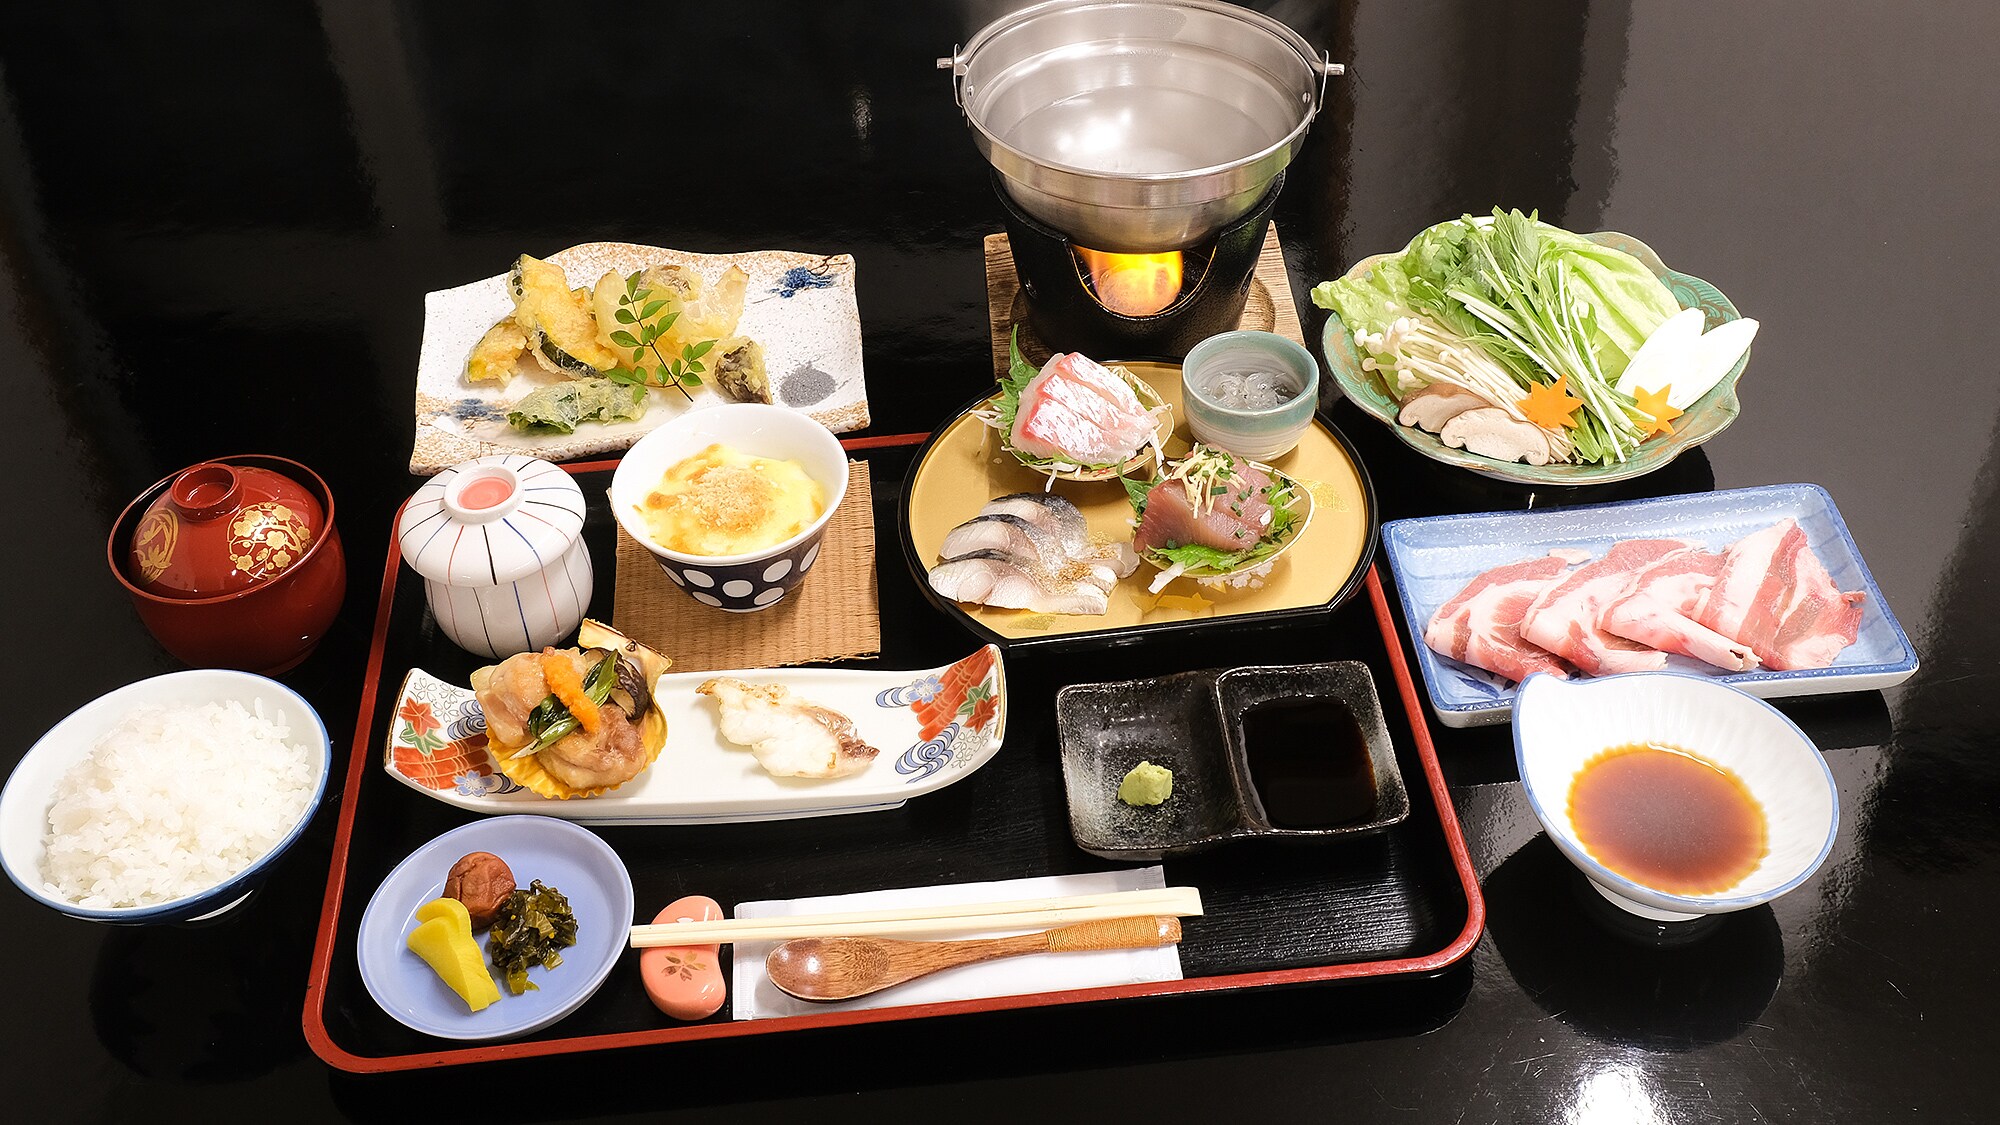 [Kishu Gozen] This is a dinner menu where you can enjoy Susami's famous boar-pig hybrids and seafood.